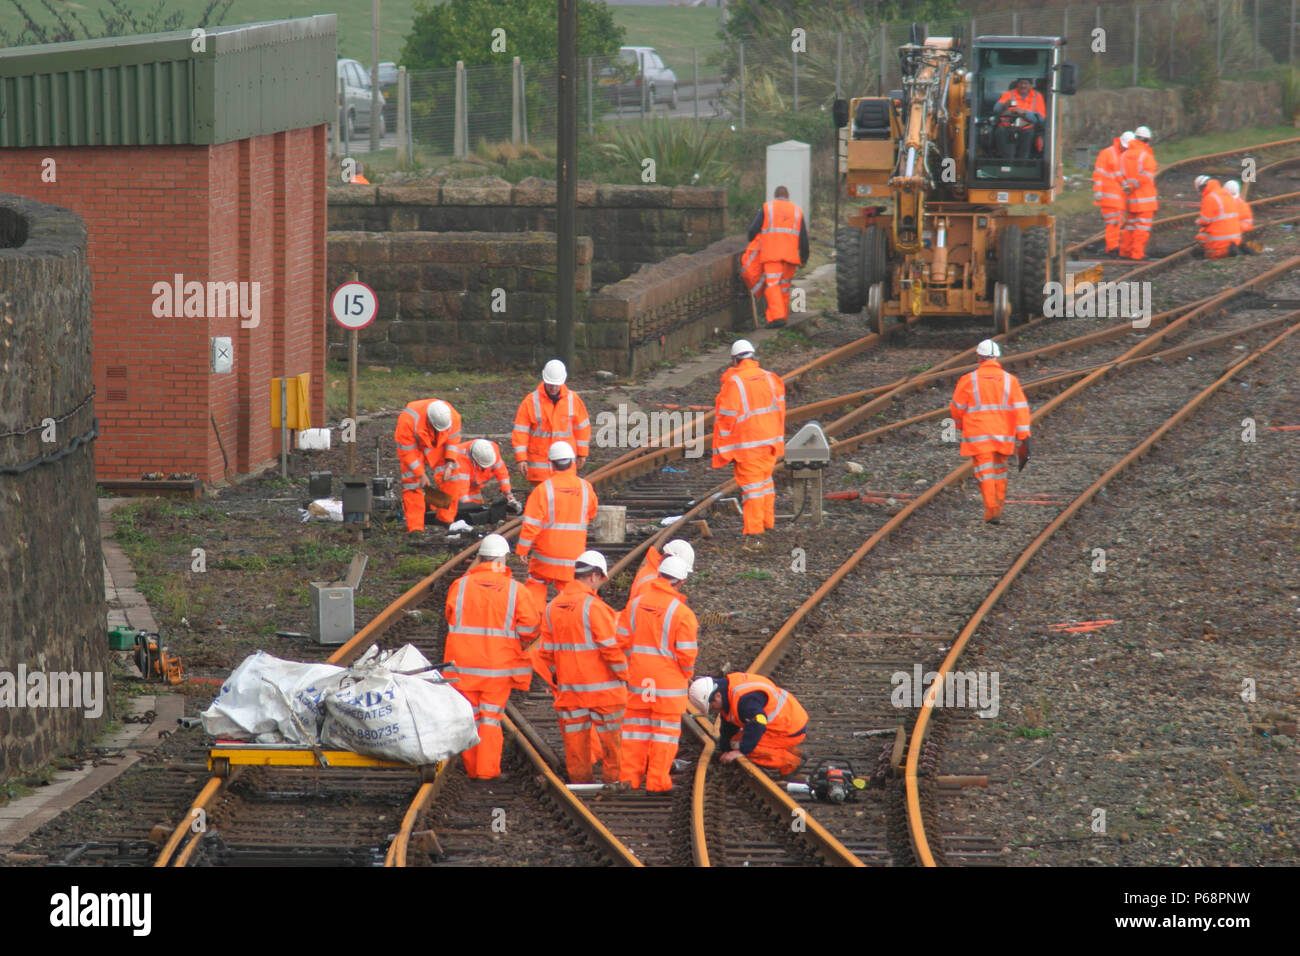 Track workers clear the flangeways and reset tracks at Penzance after the great storms of October 2004. Stock Photo